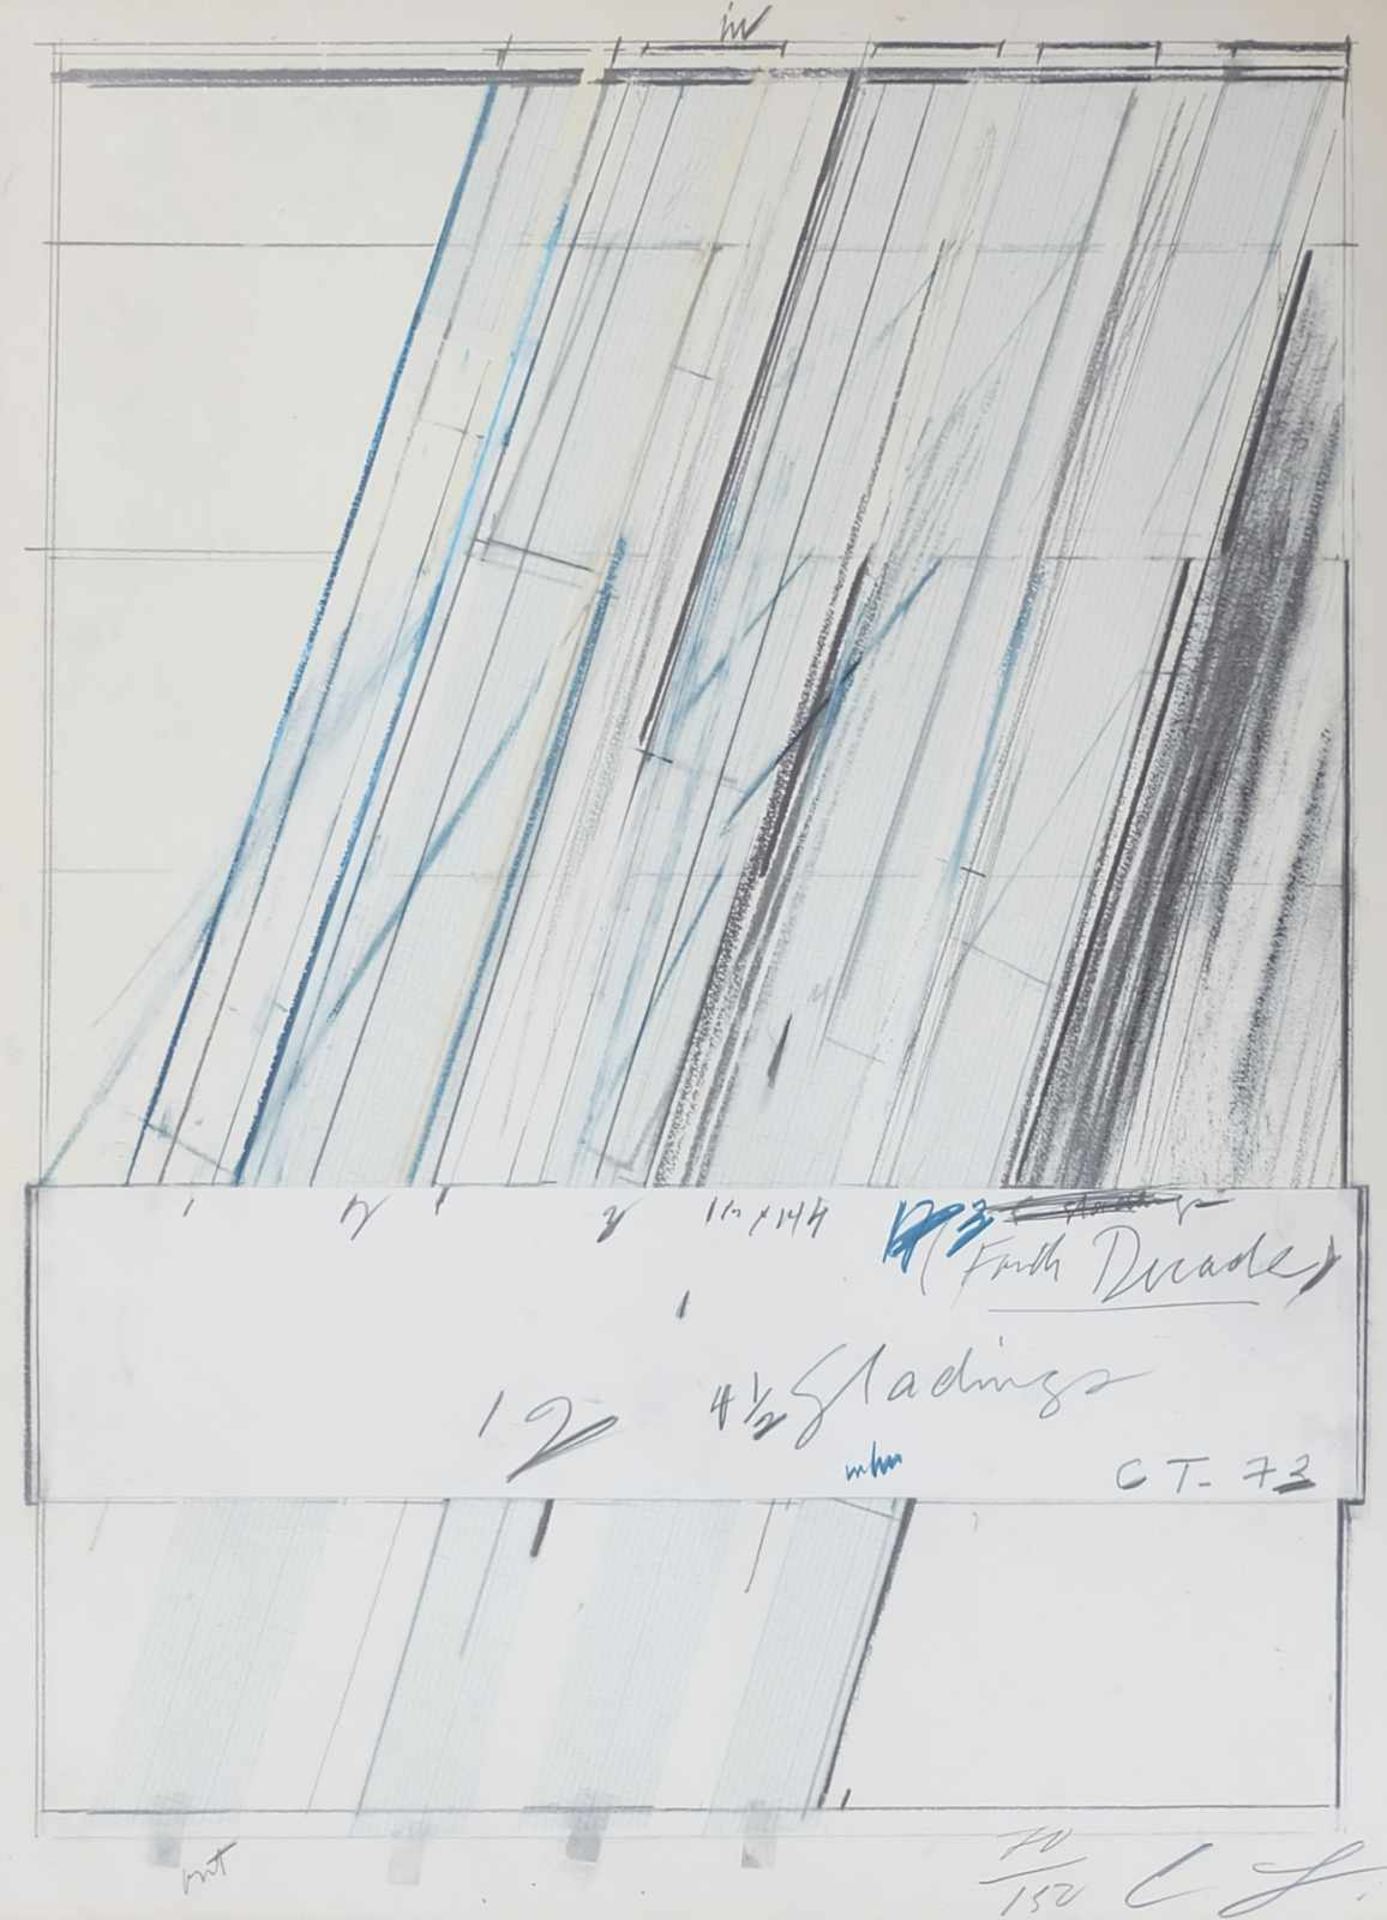 TWOMBLY, Cy (*25-04.1928 Lexington/ Va. +05.07.2011 Rom), Offsetlithografie, "Fourth Decade", in der